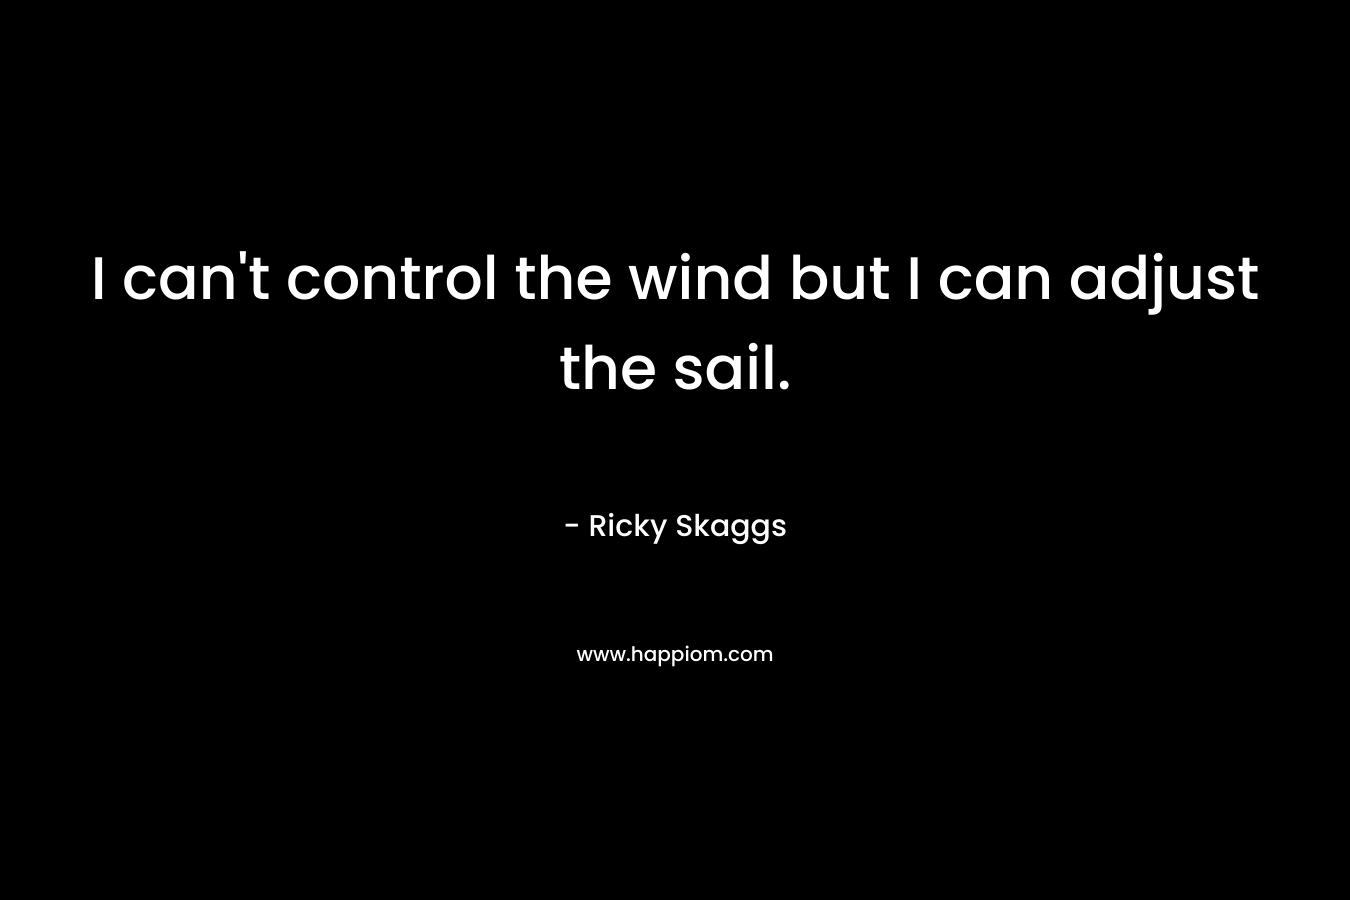 I can’t control the wind but I can adjust the sail. – Ricky Skaggs